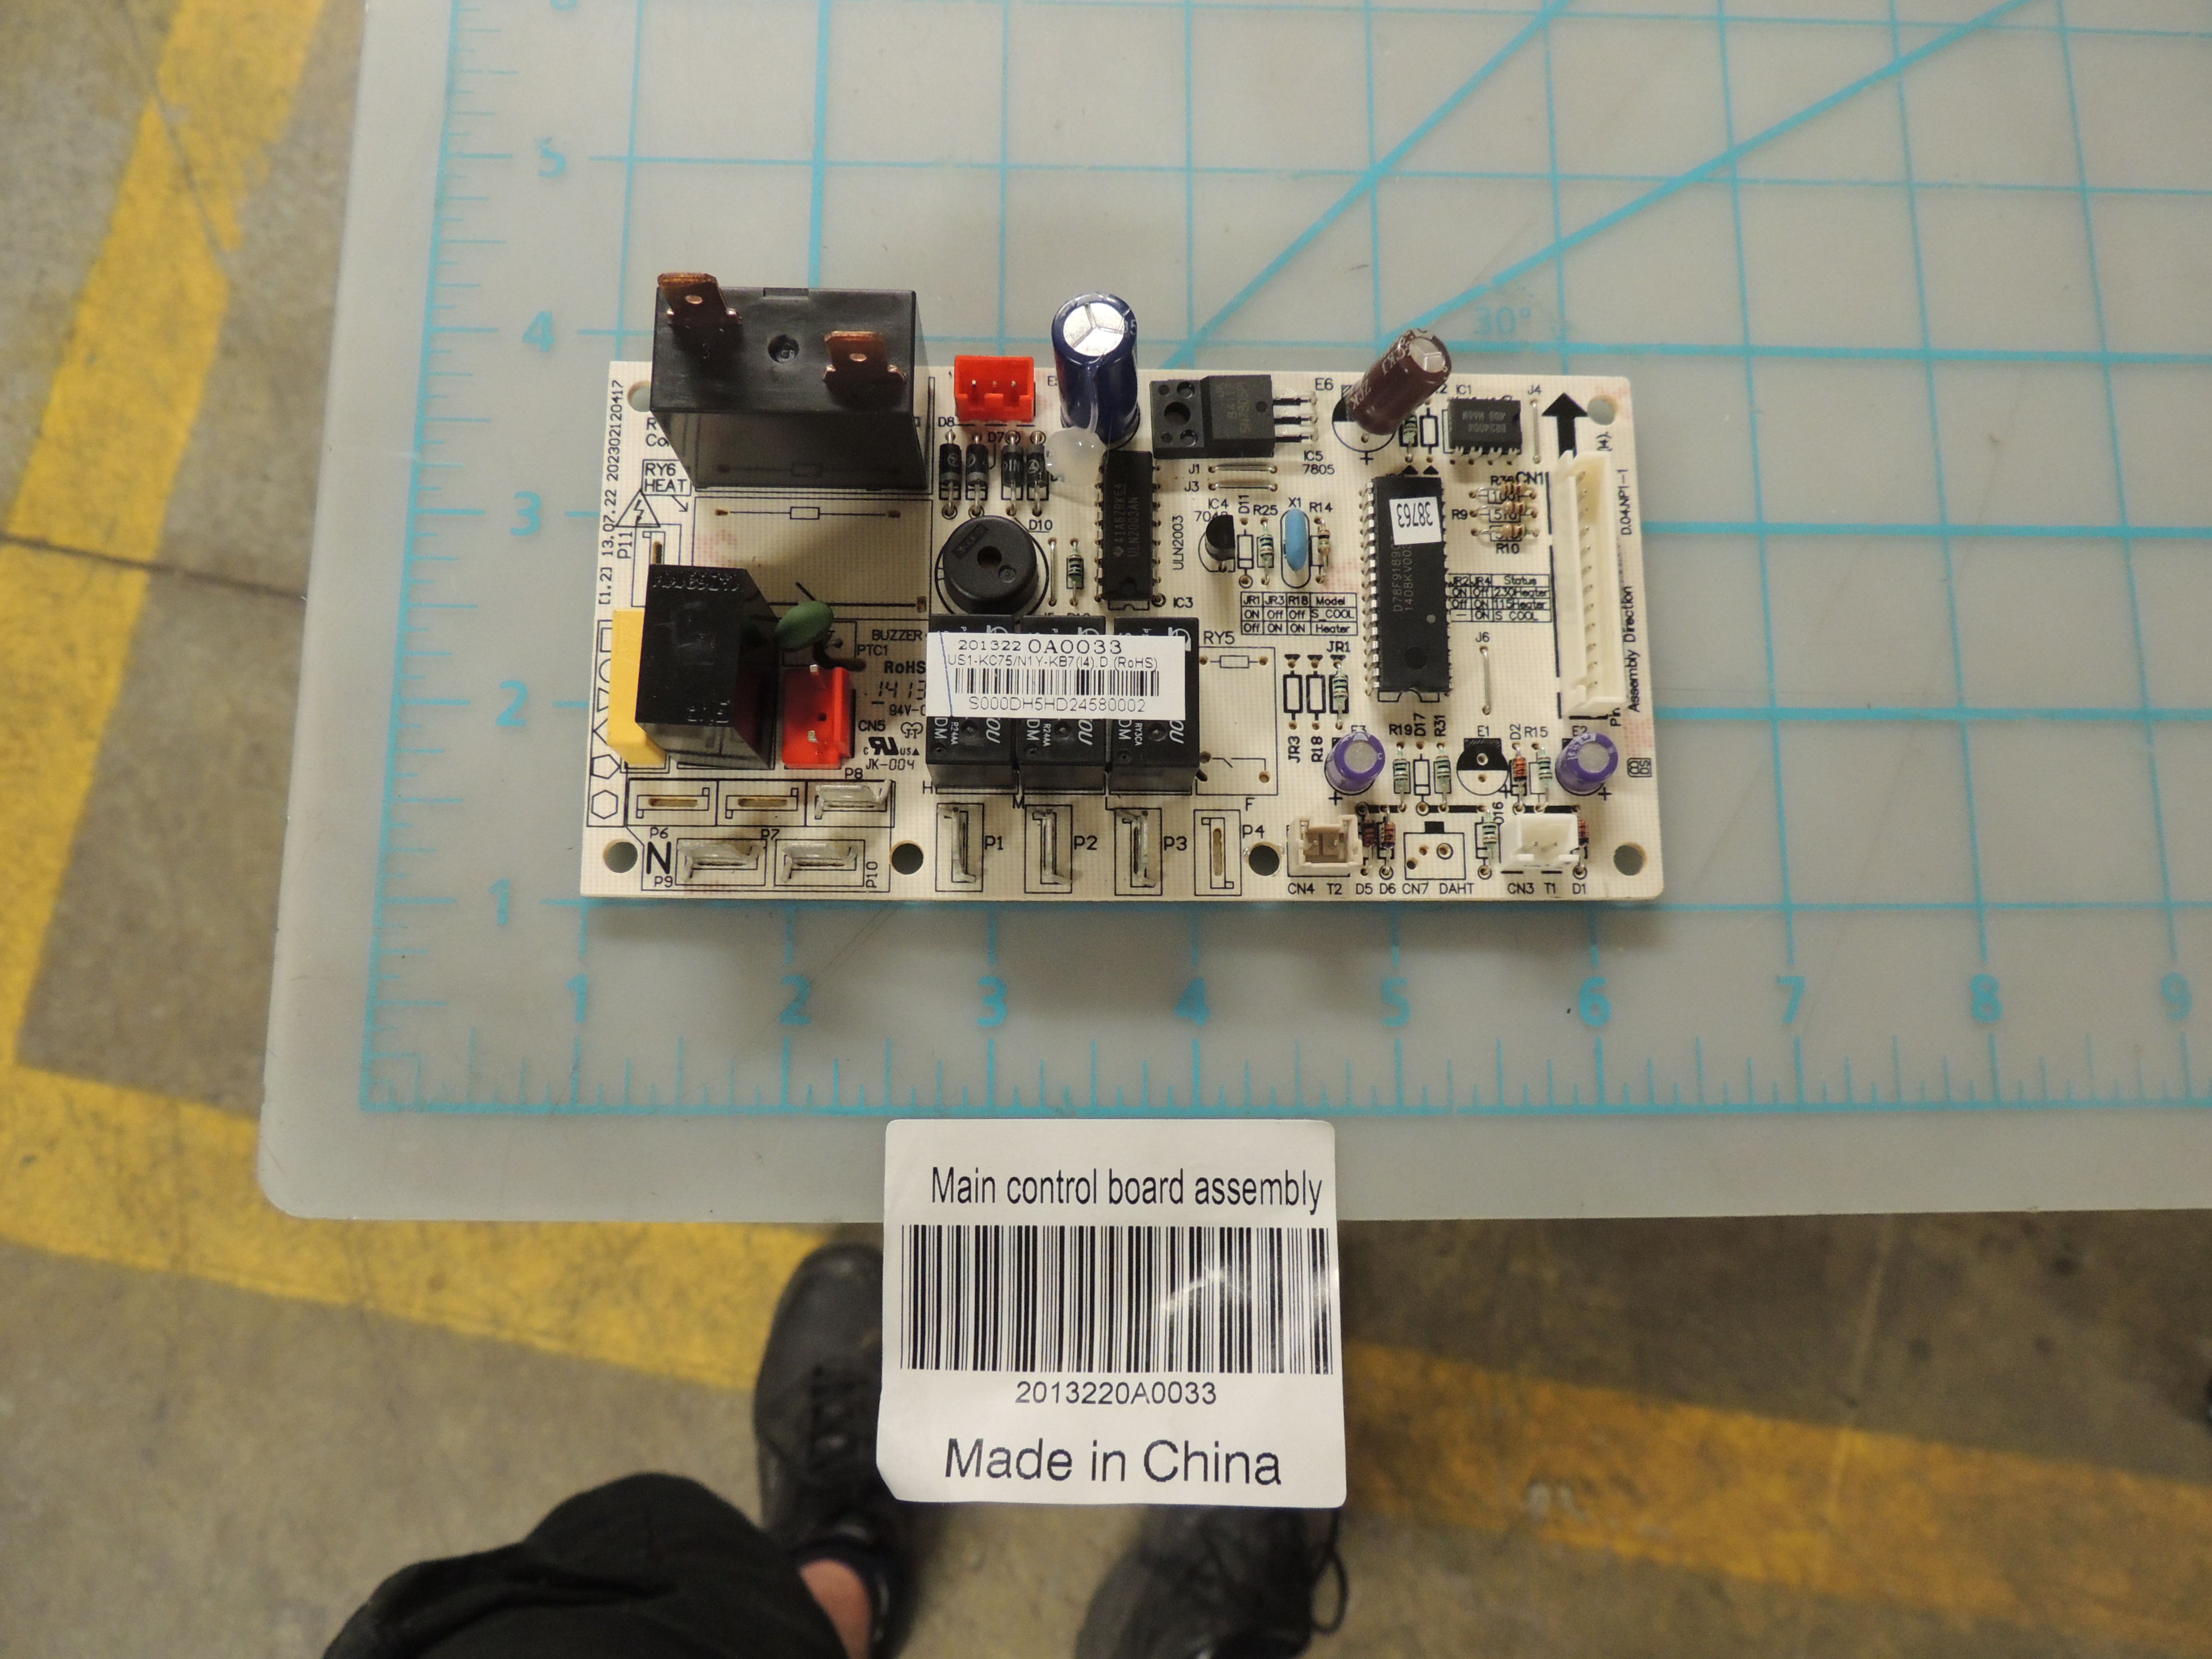 Main control board assembly